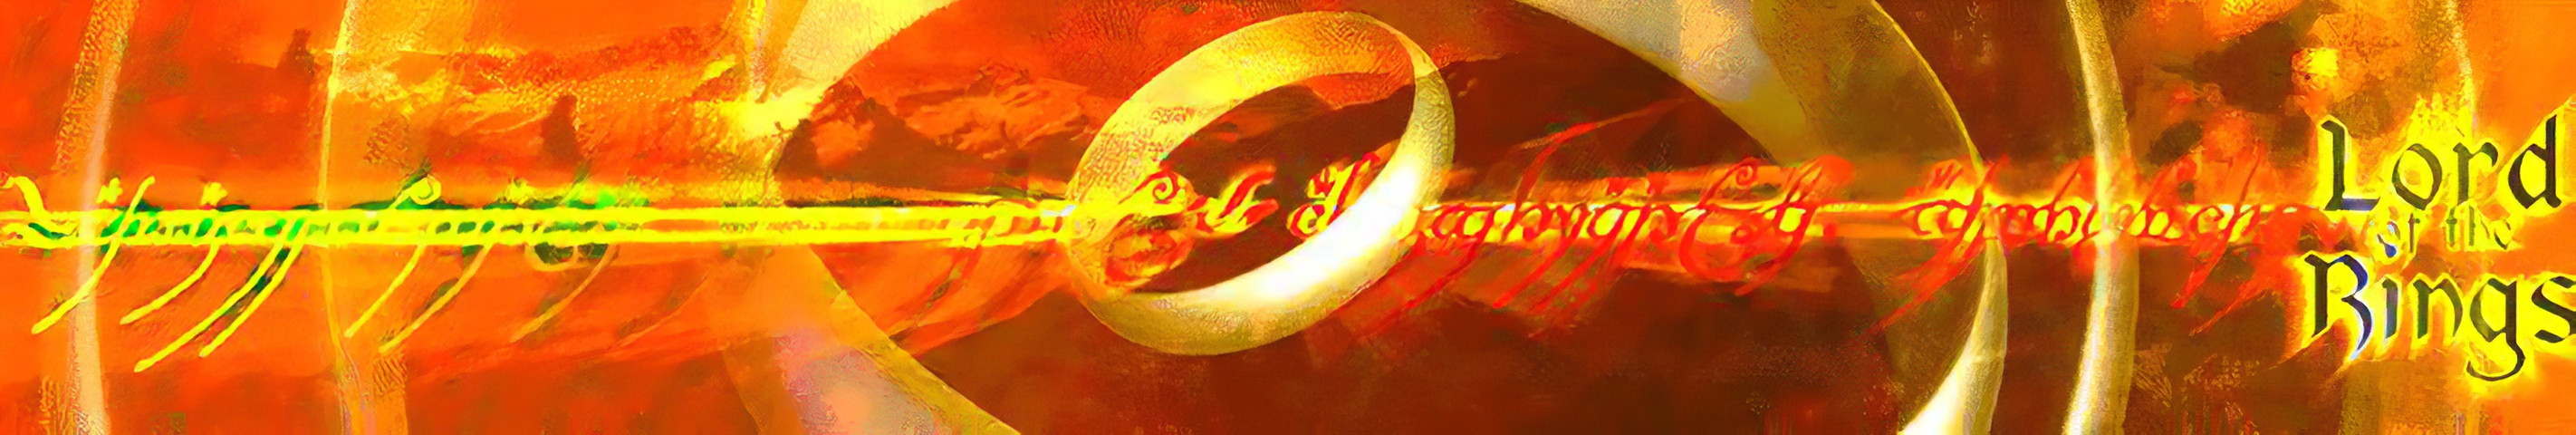 The one ring web banner